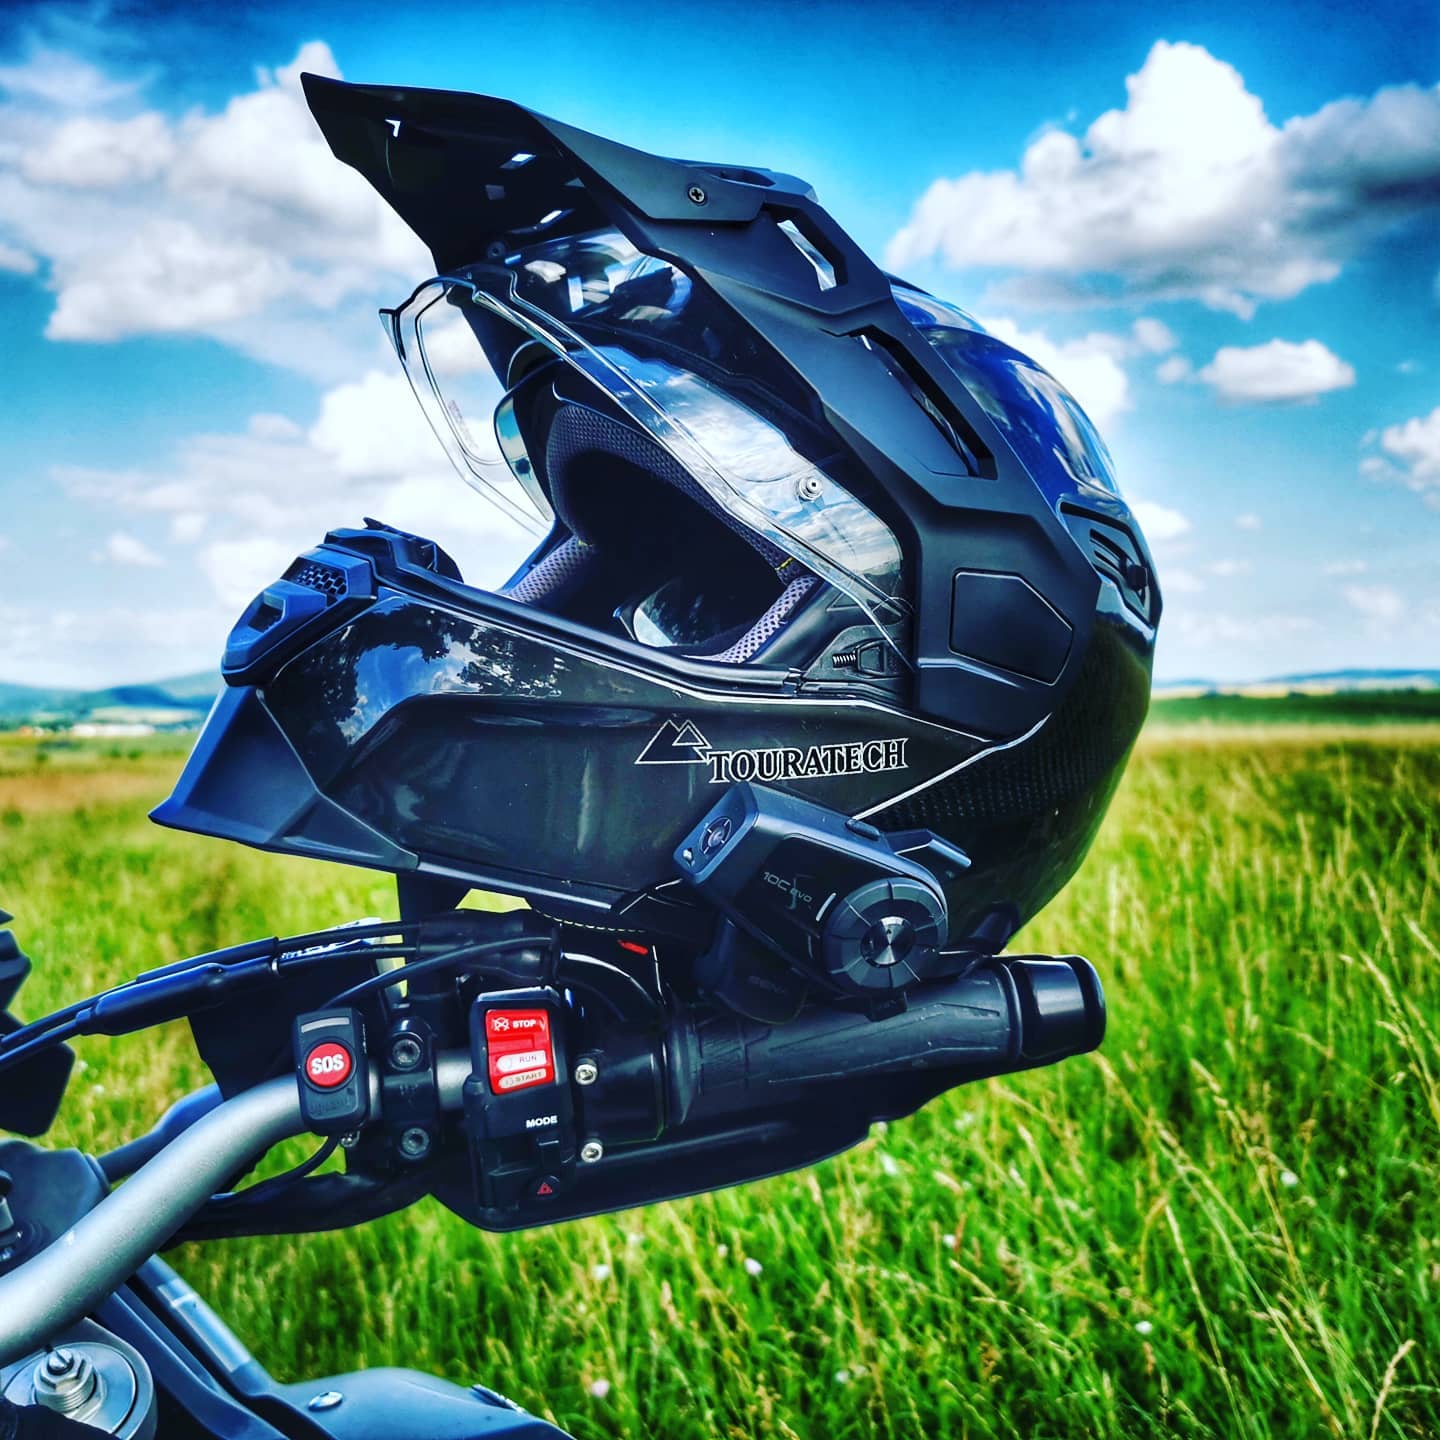 The dguard SOS button is best mounted on the handlebar, so the motorcyclist has quickest access in accident situations. 